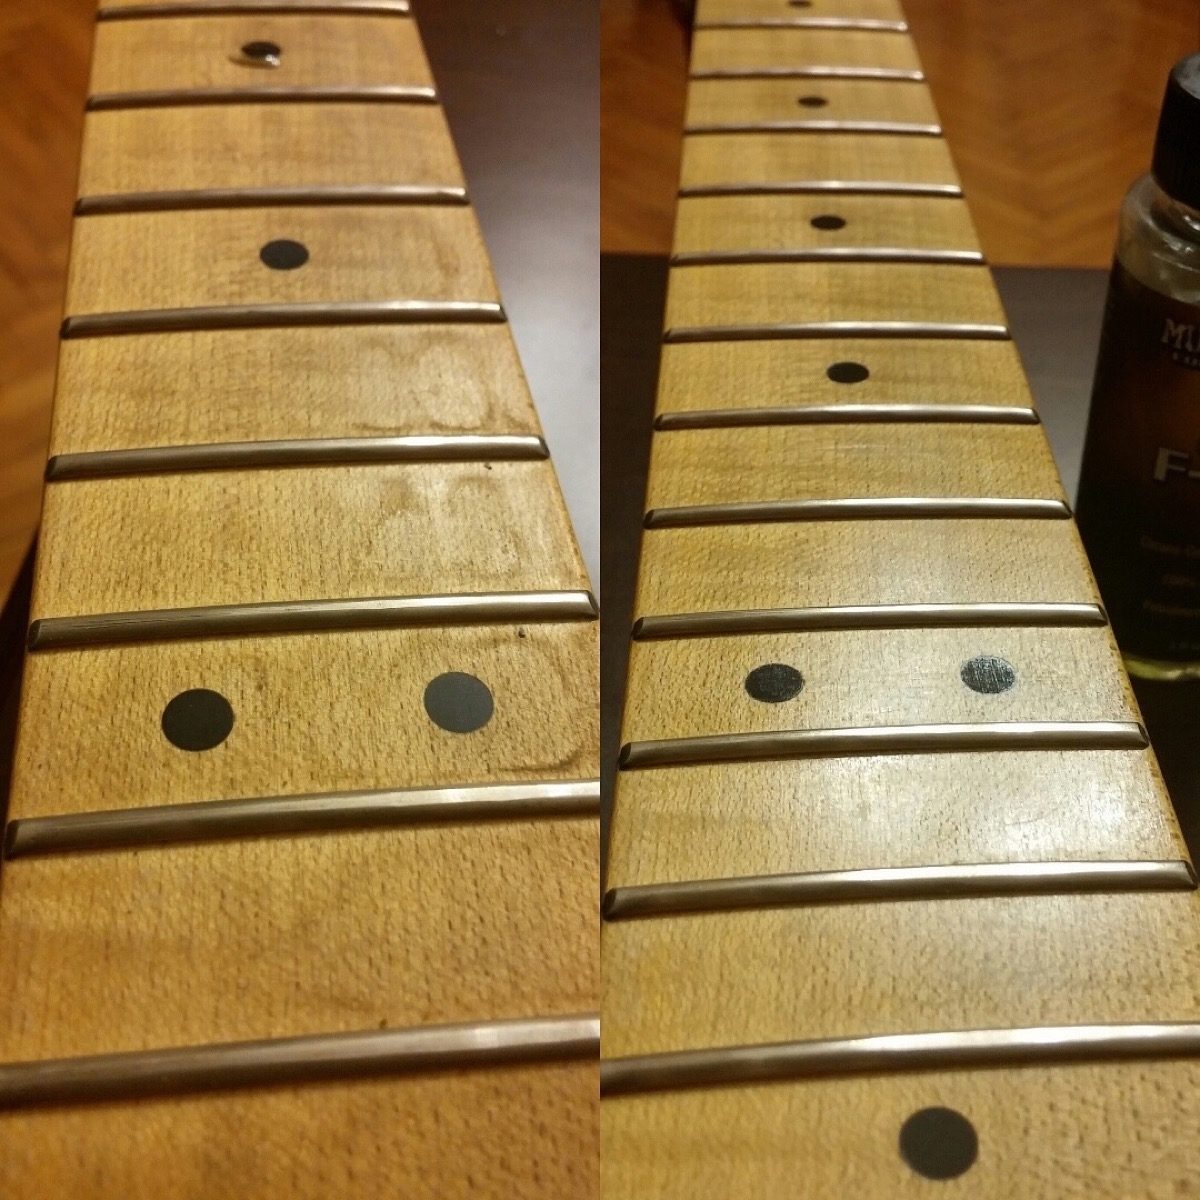 Haven't cleaned the fretboard since i bought the guitar in 2015. Shame on  me! I used a pick for the dead skin/dirt, and Dunlop fretboard-oil. : r/ guitars